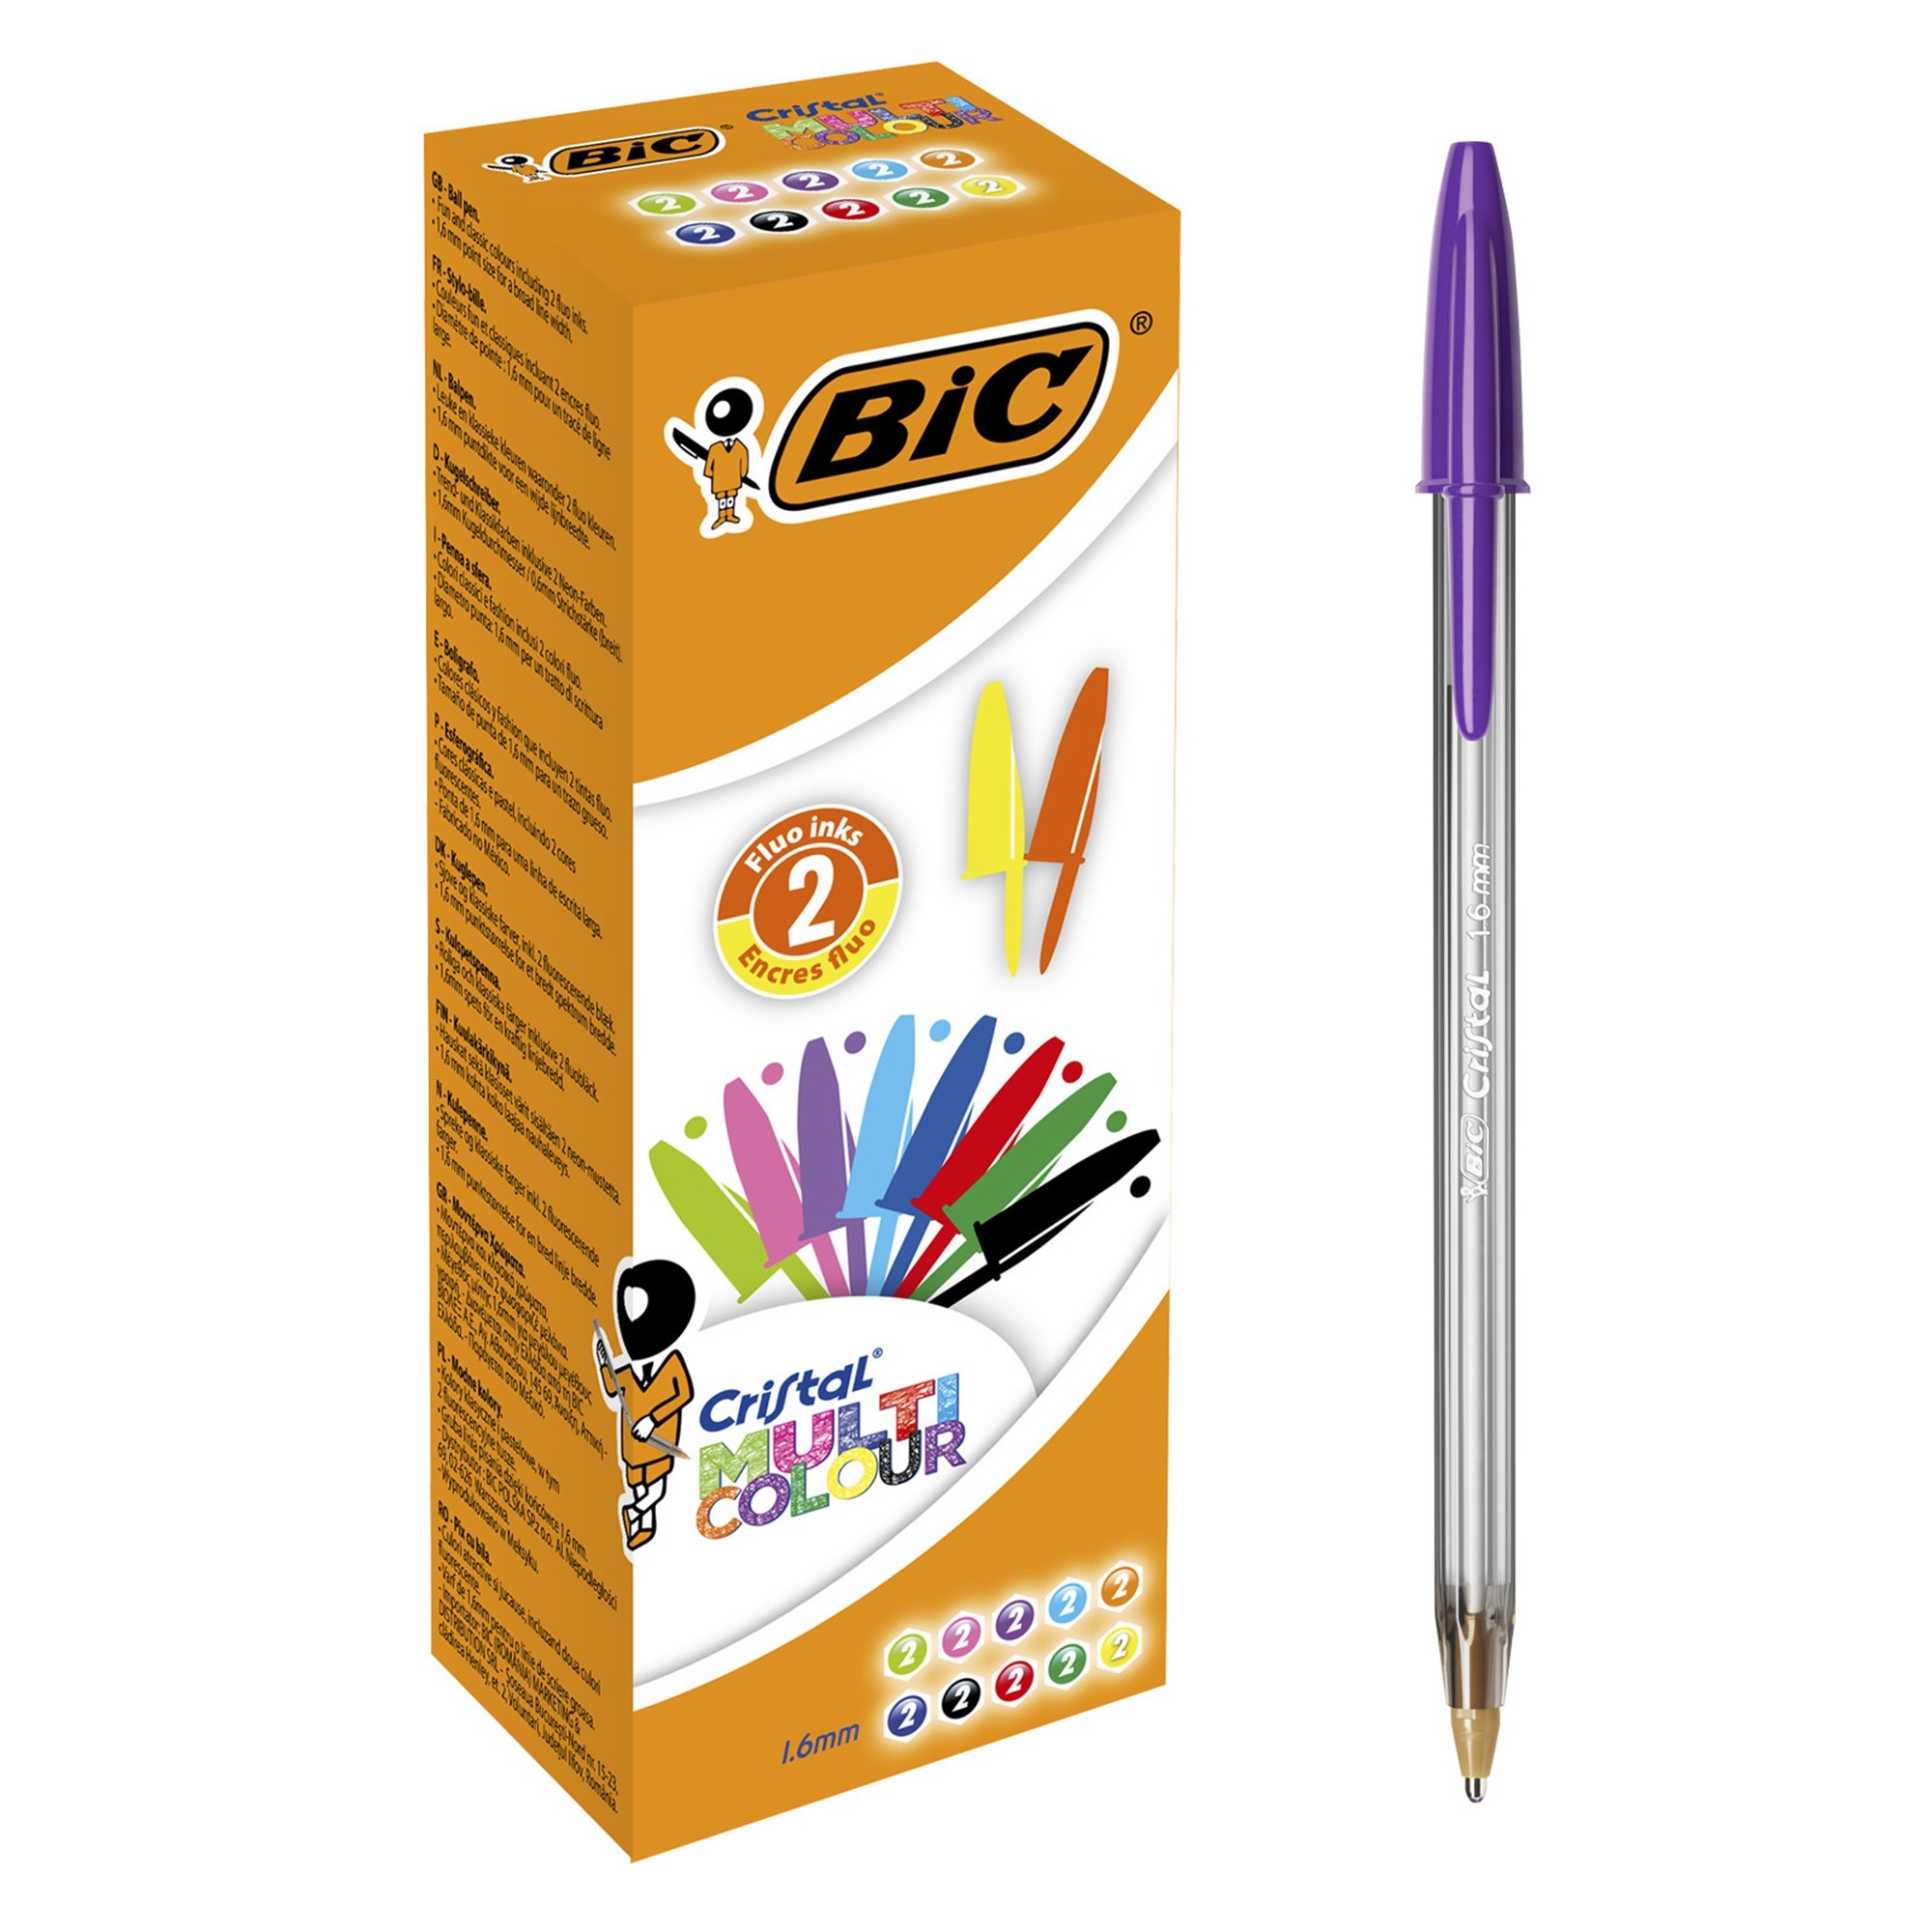 Bic Cristal Fun Ballpoint Pens Wide Point (1.6 mm) - Pink, Box of 20